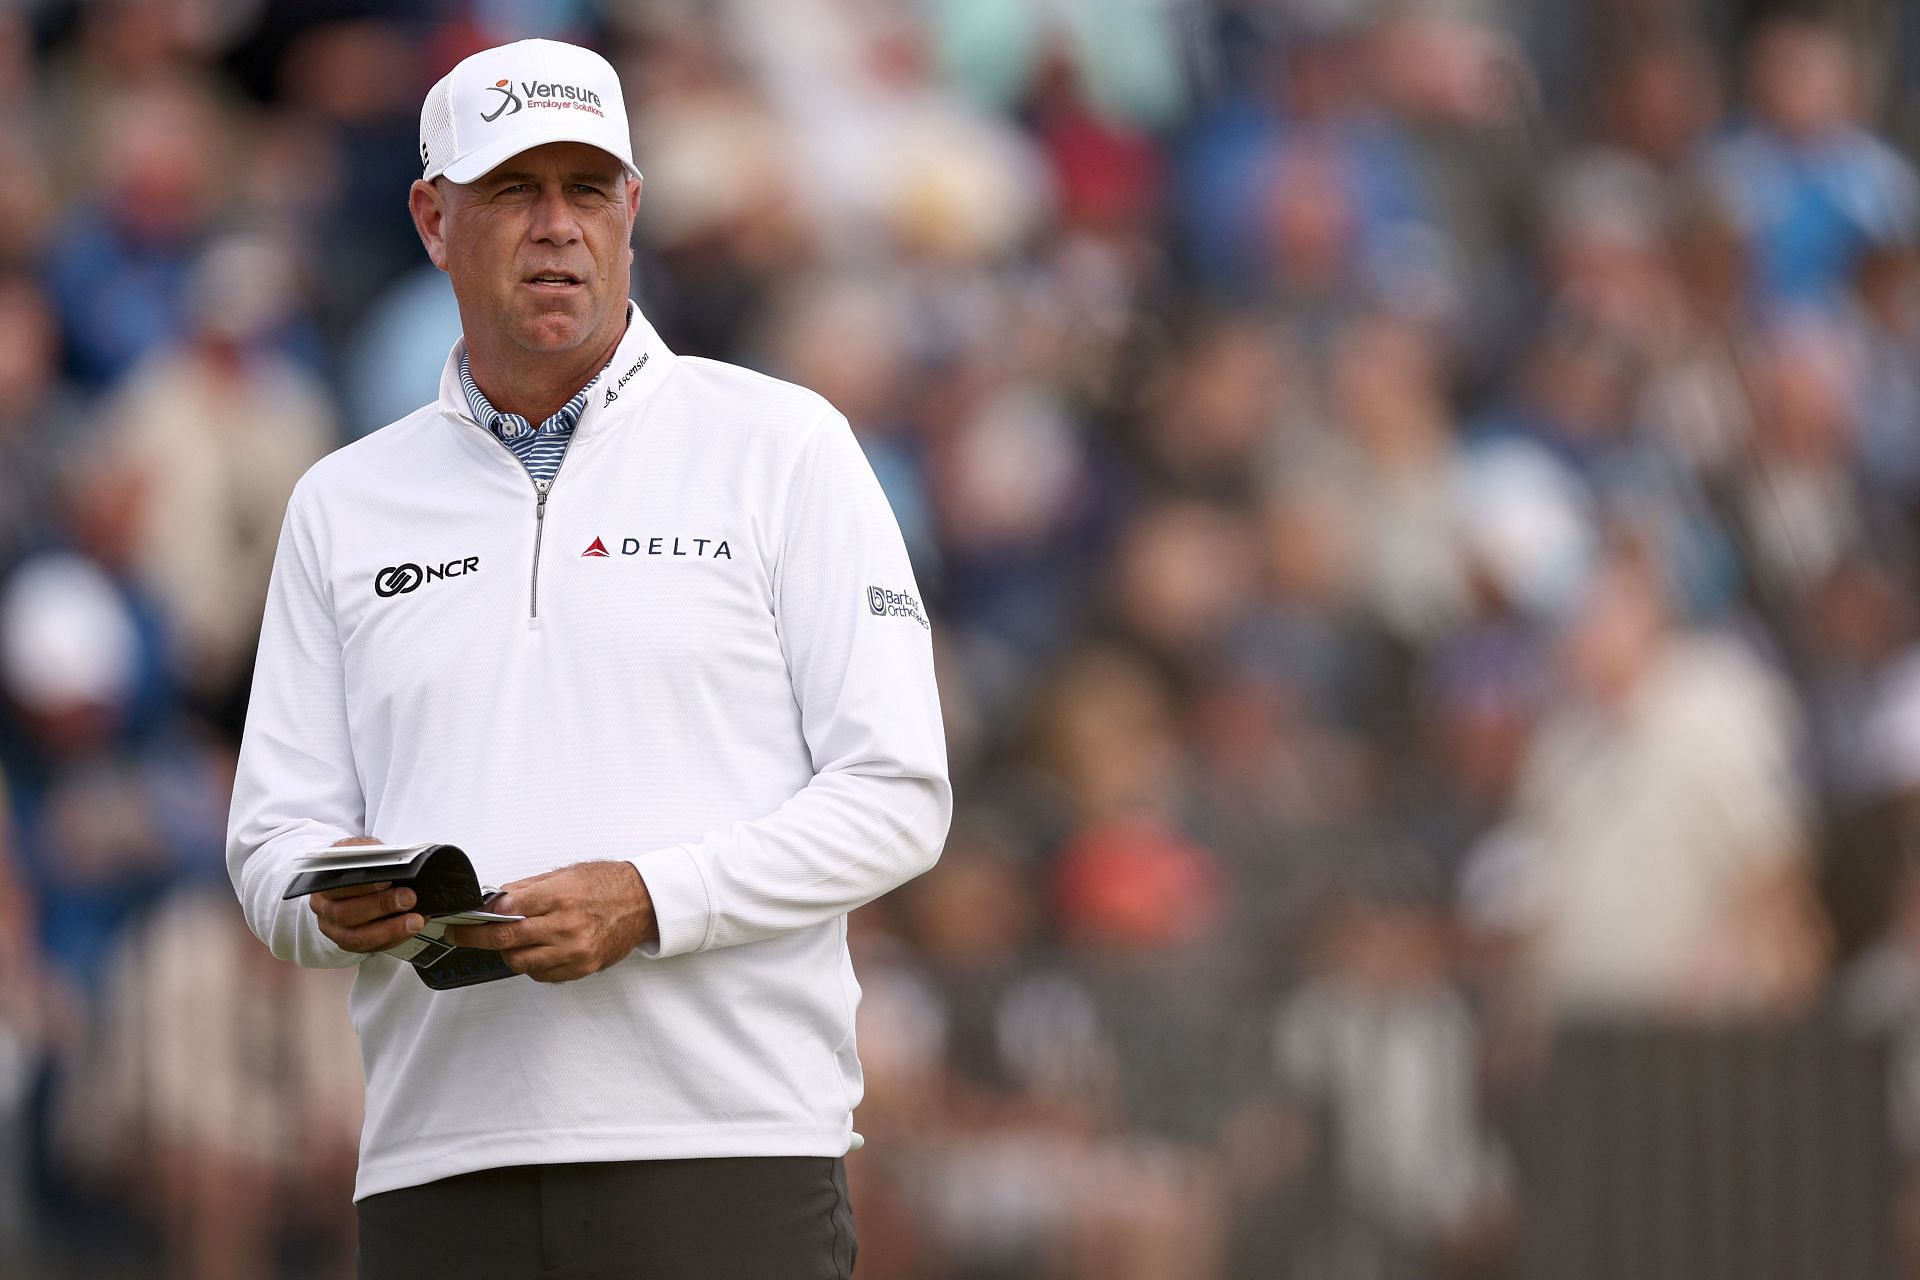 Stewart Cink during the first round of the 2023 Open Championship